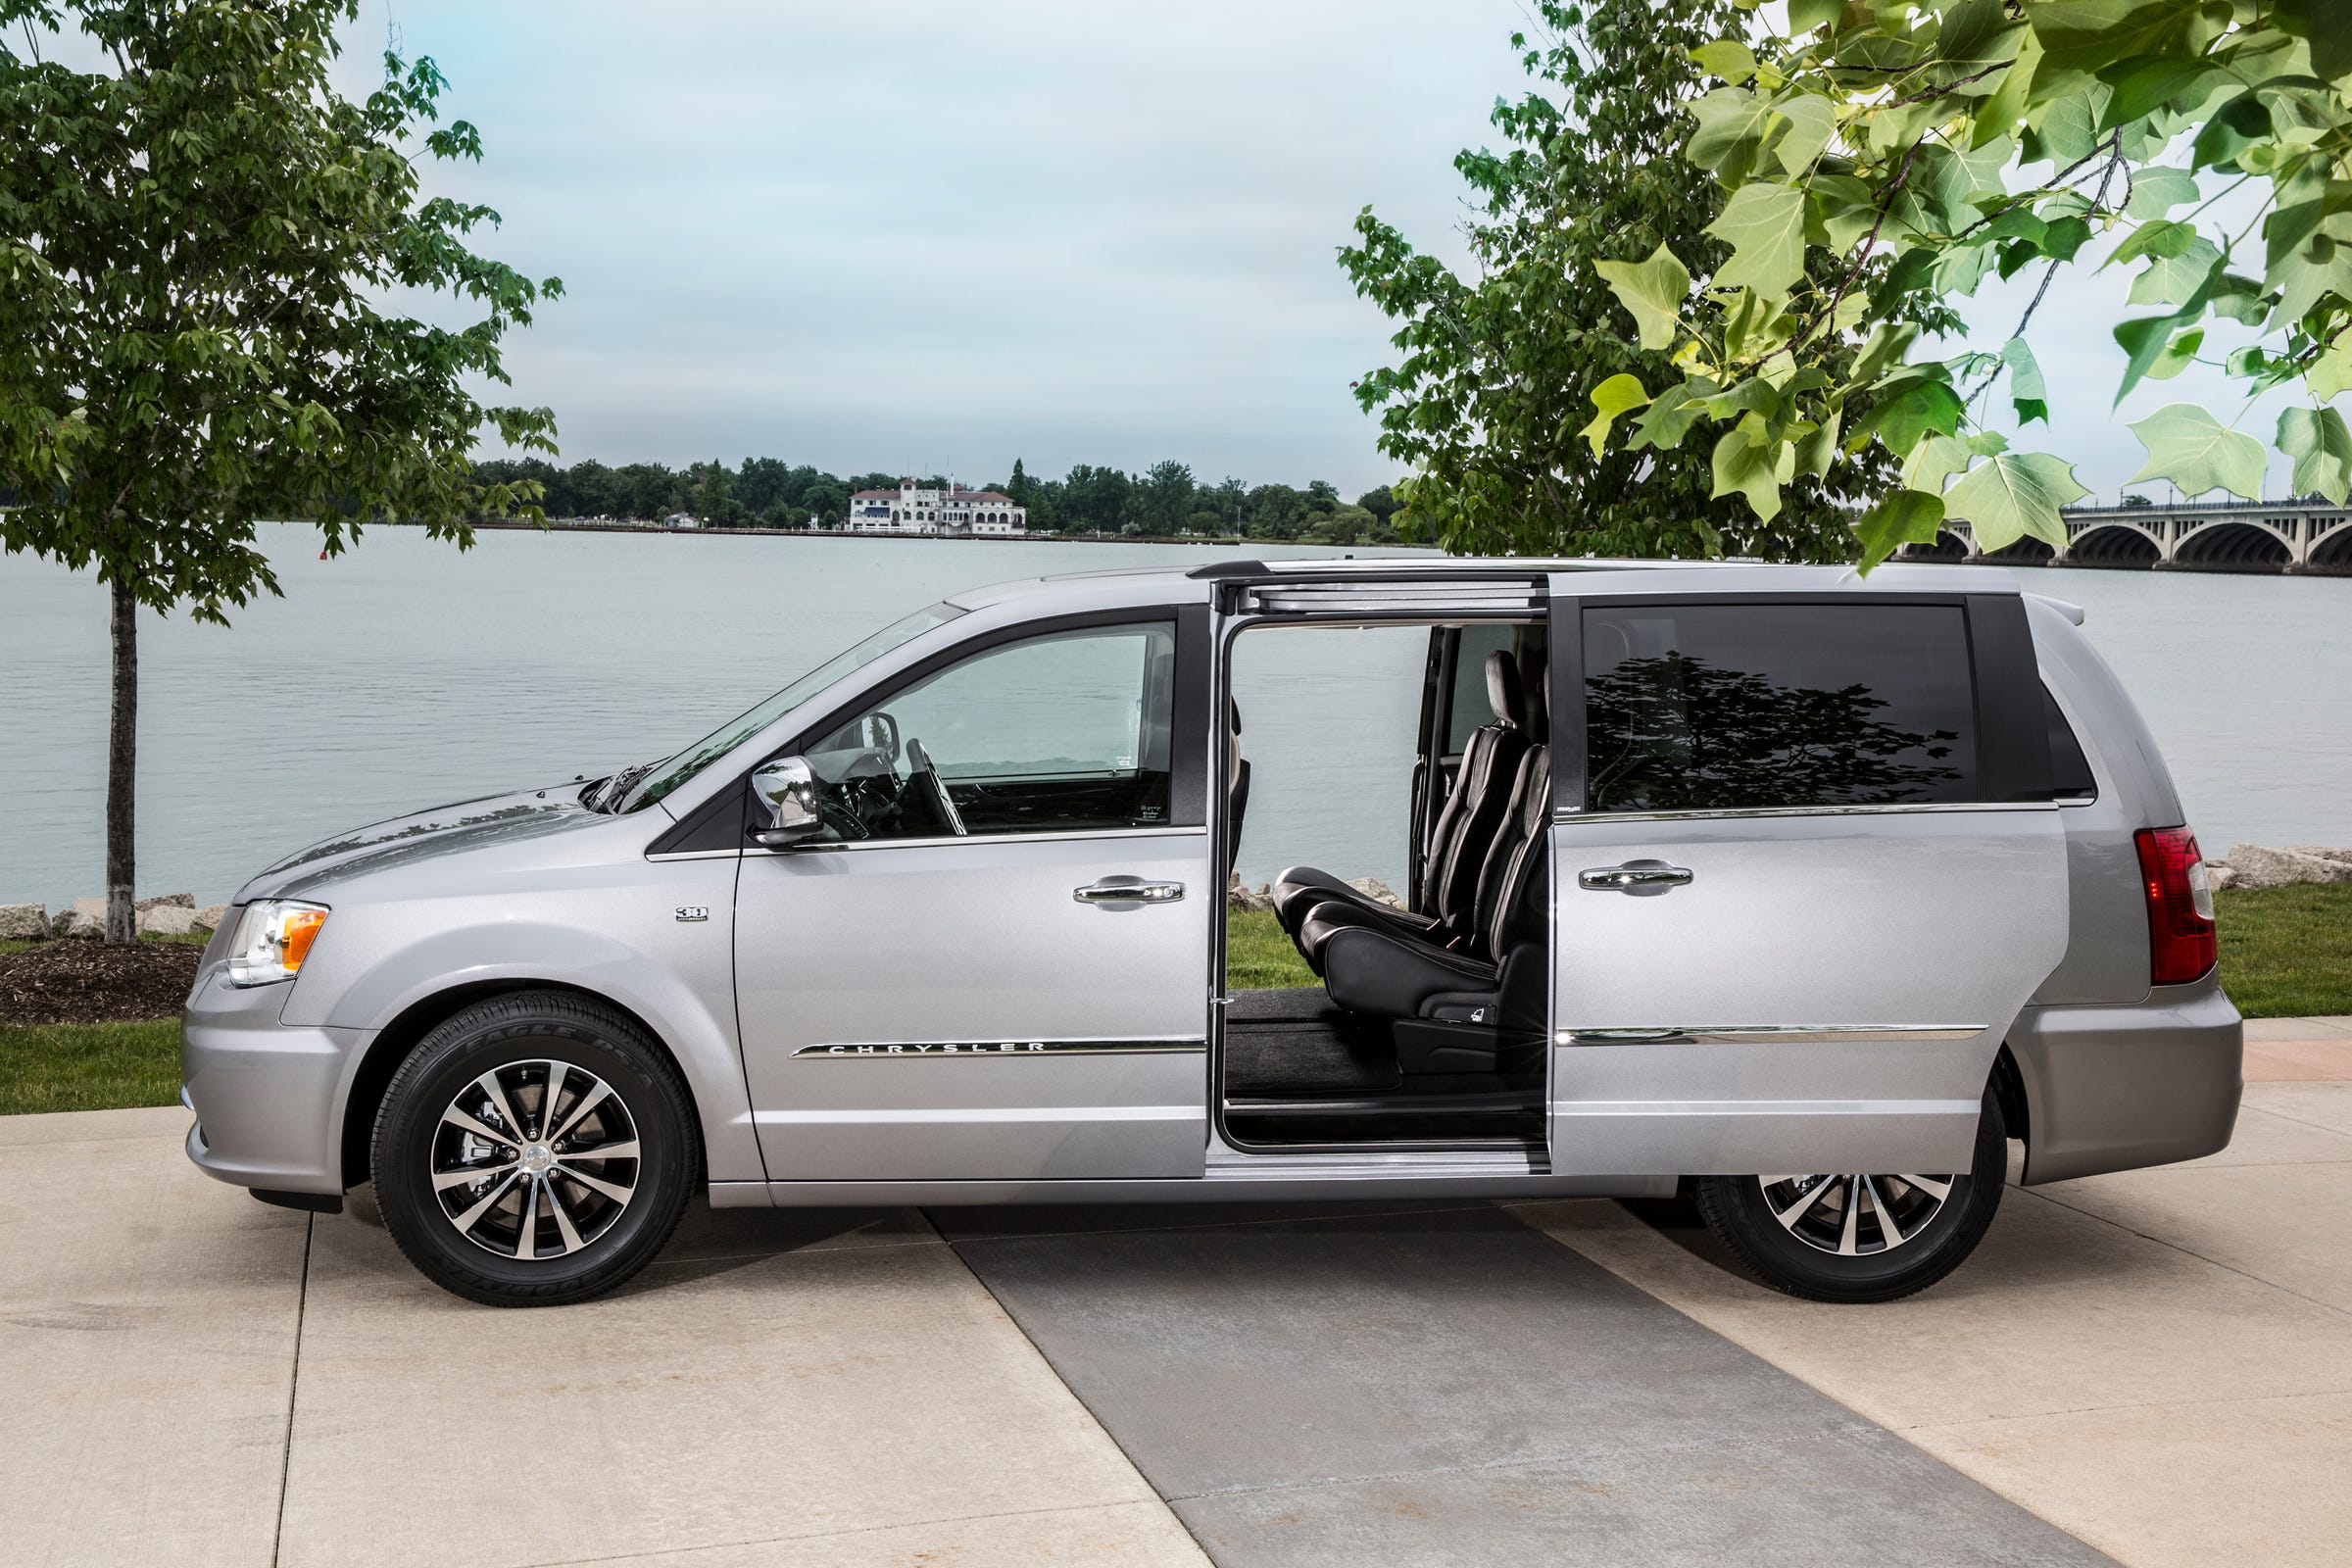 2014 town and country minivan